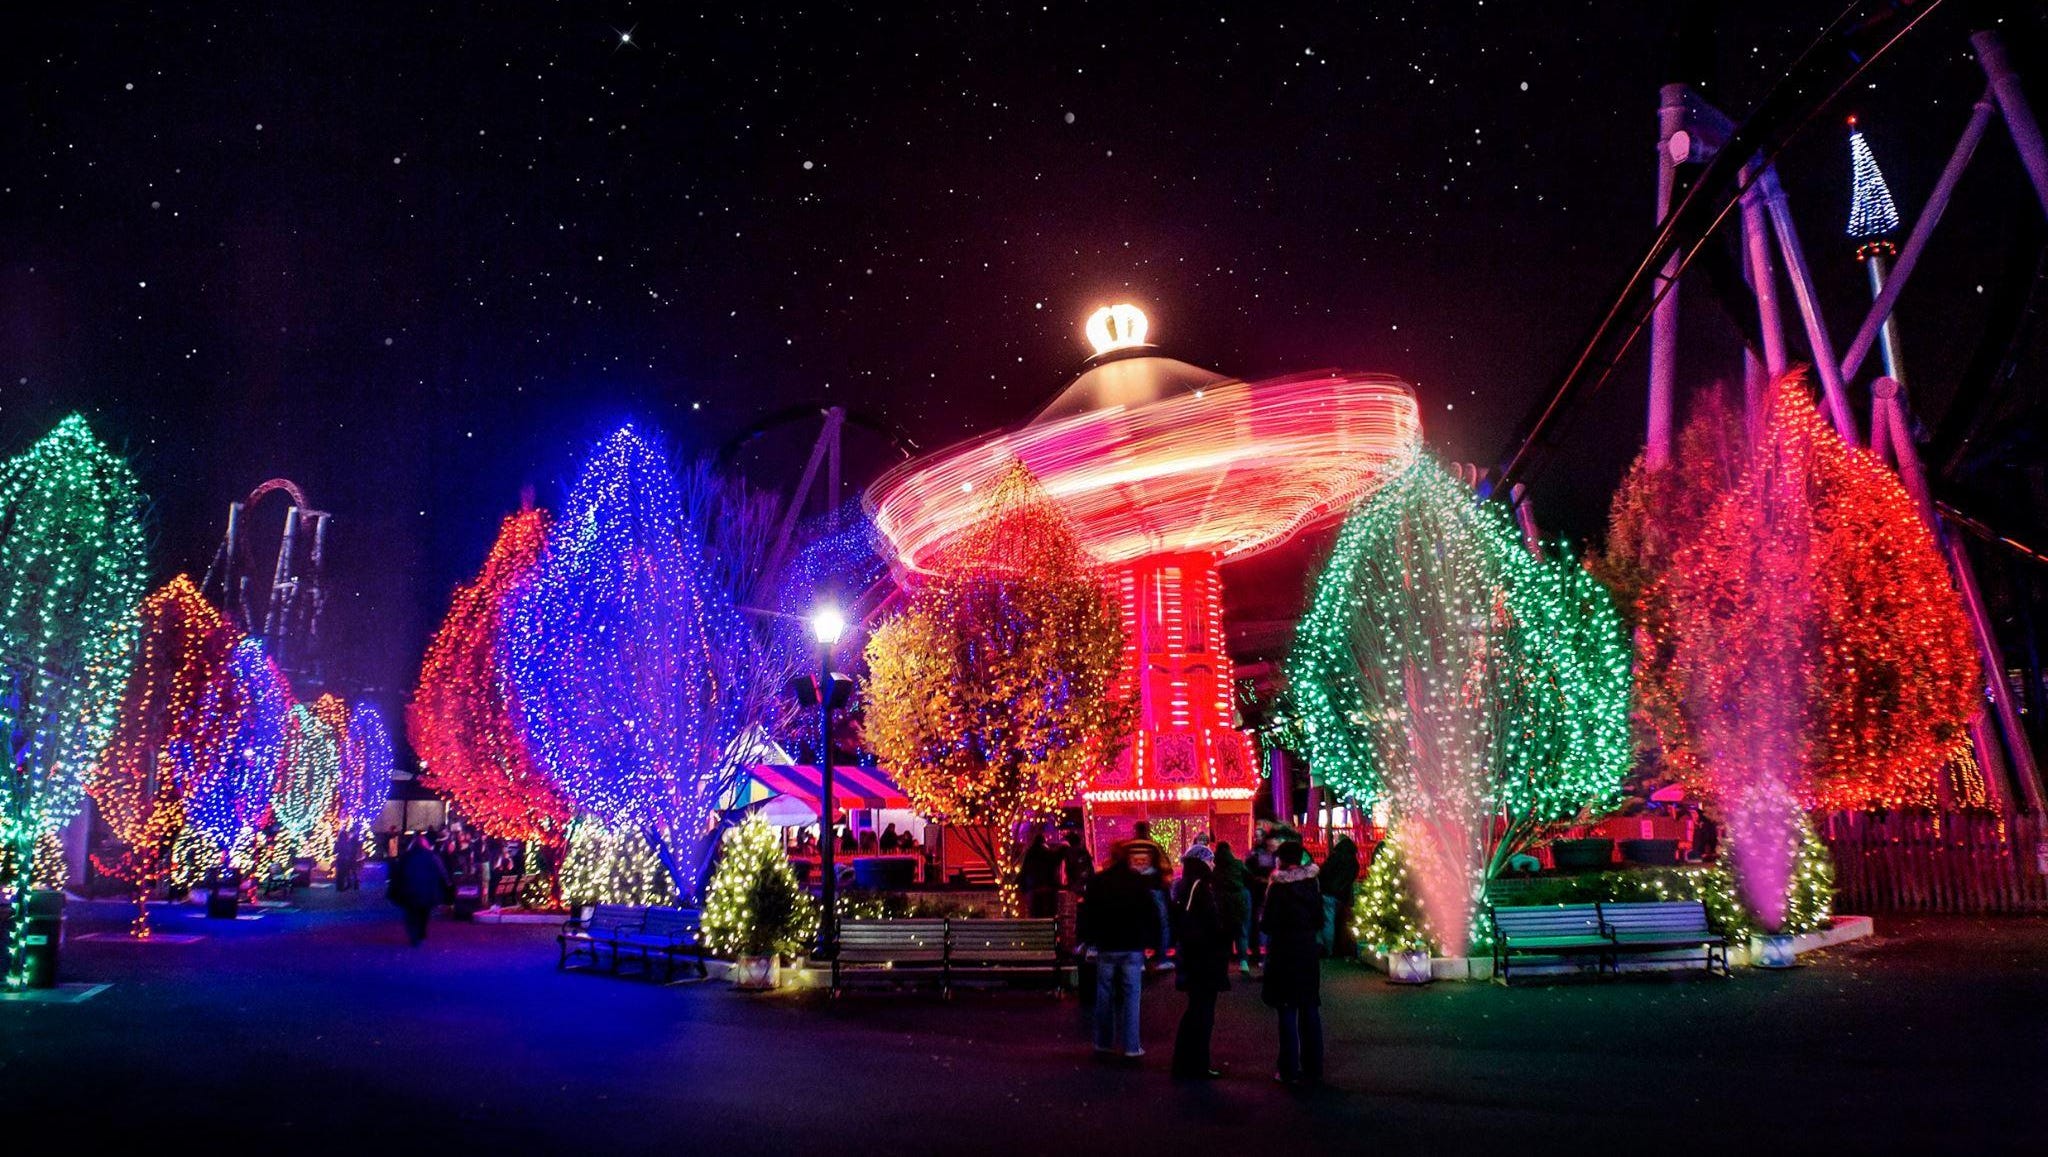 Christmas Candylane in Hershey now open with rides, reindeer, lights